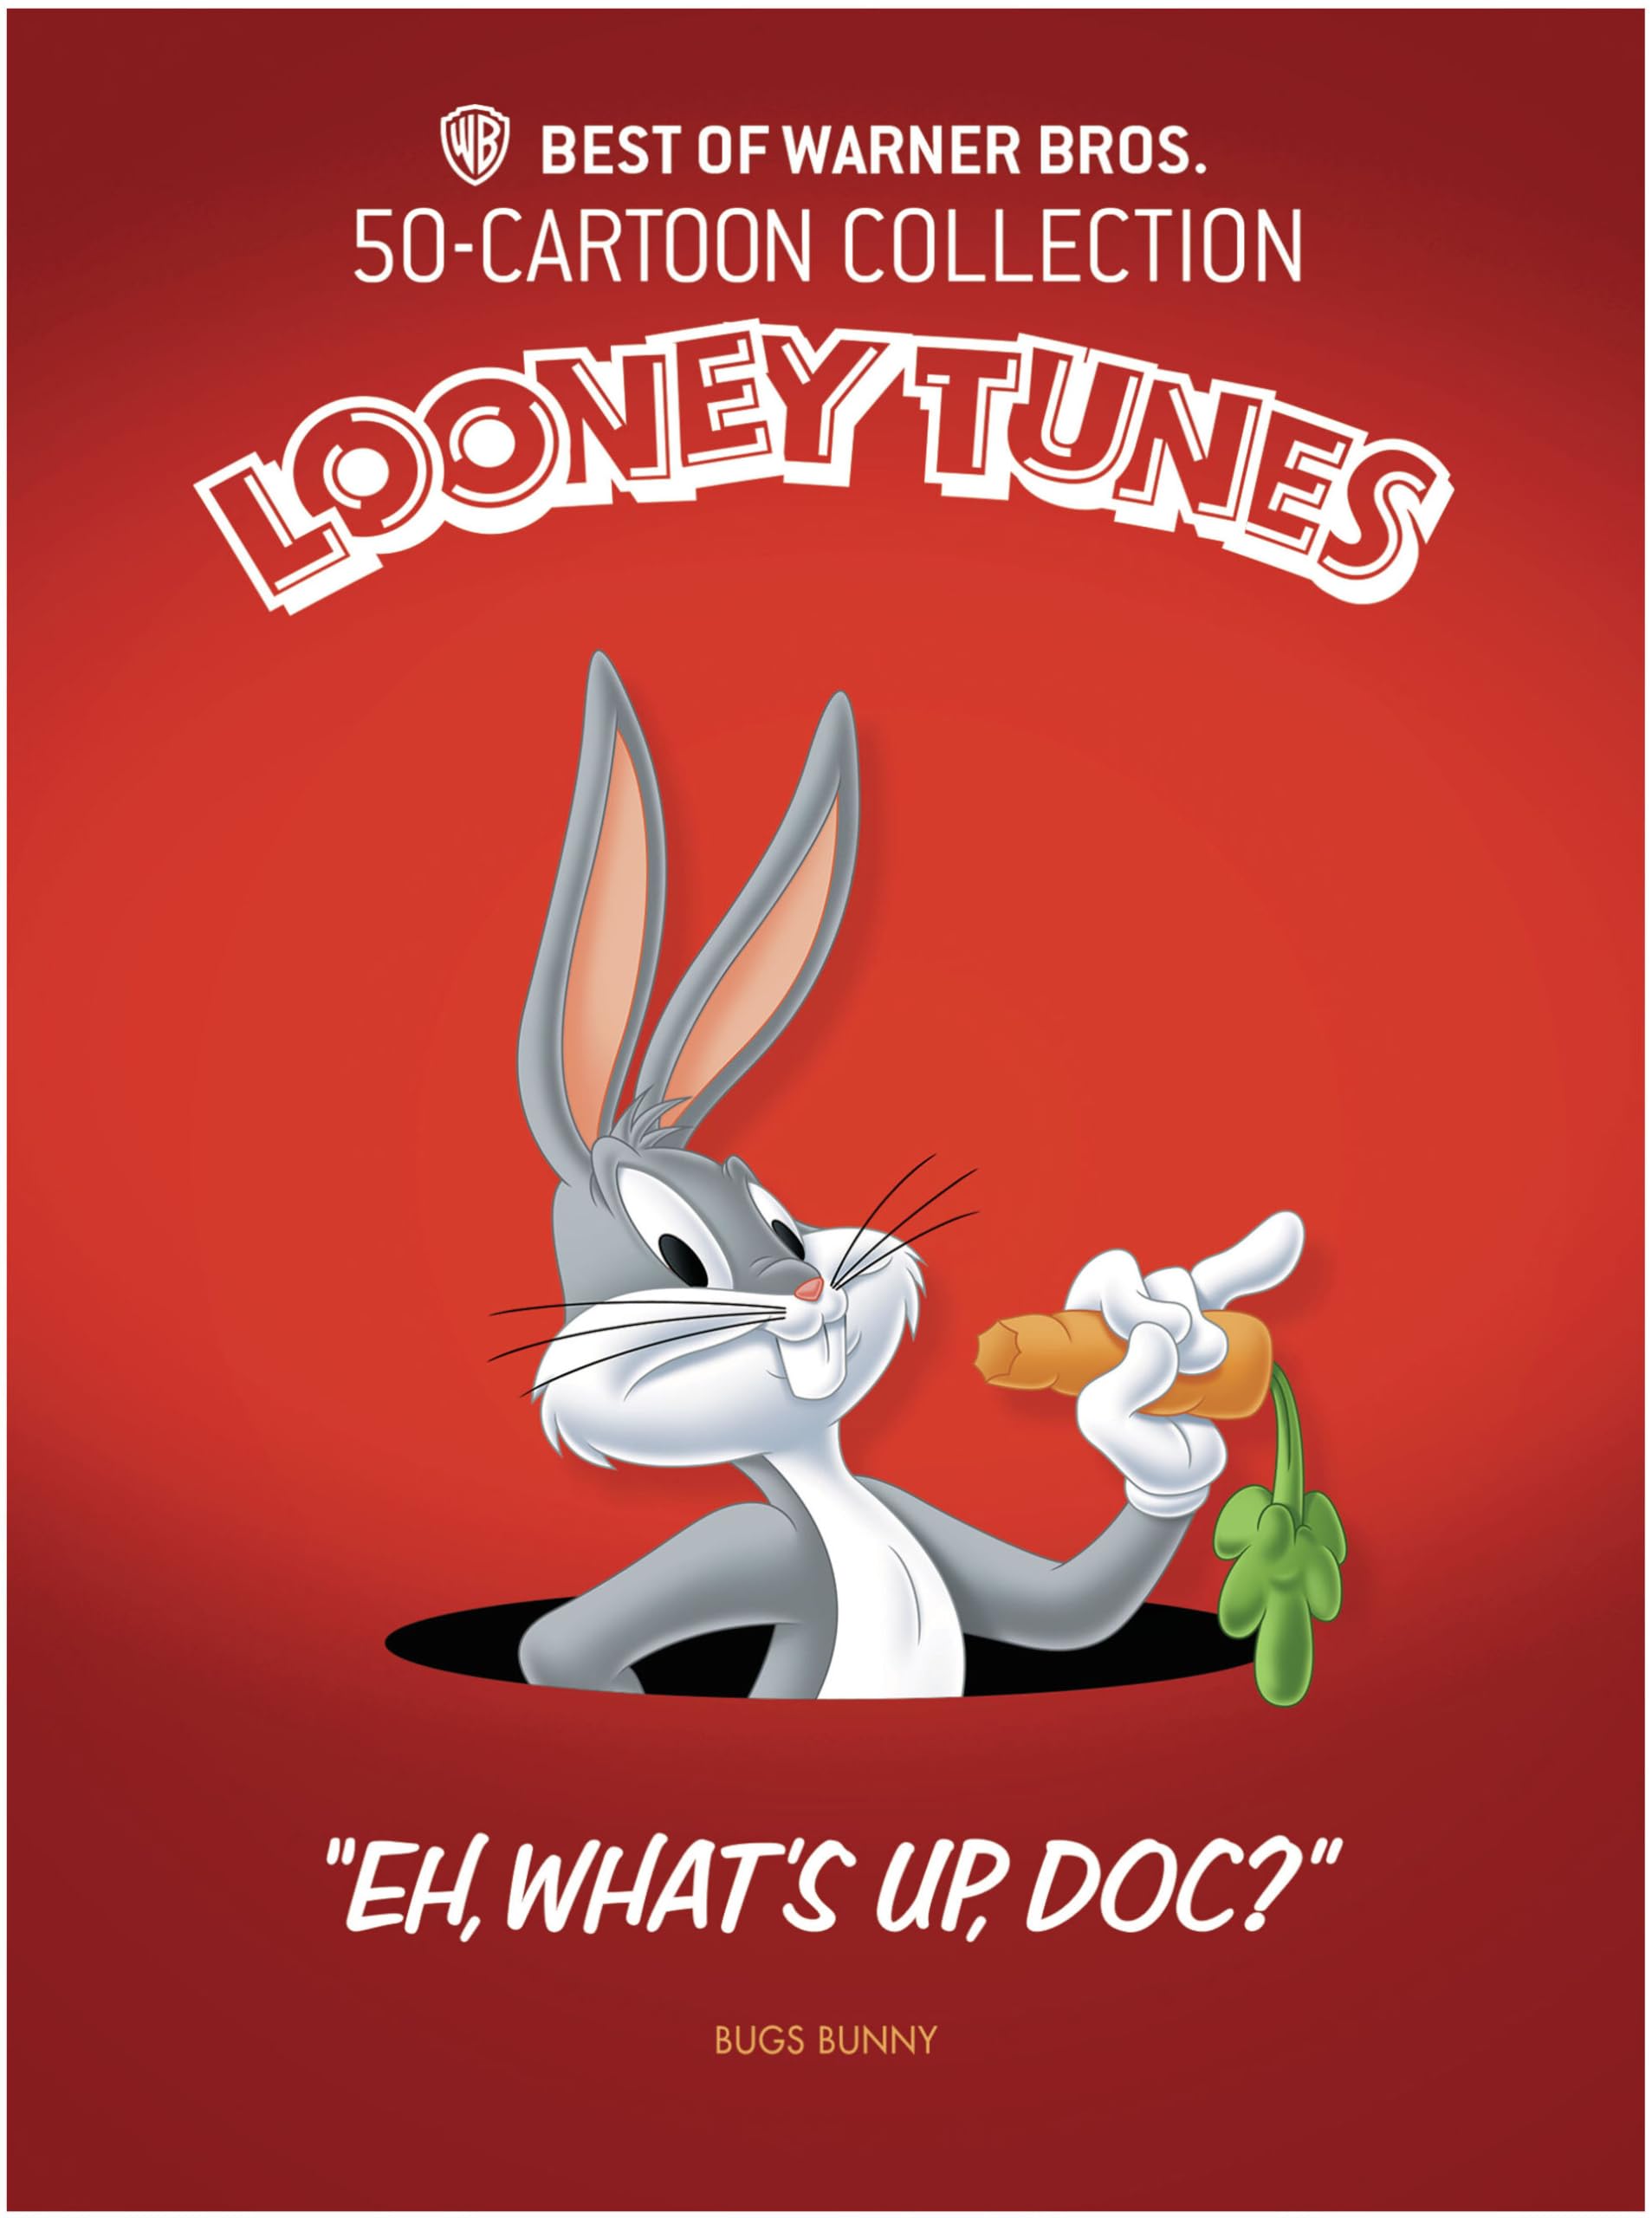 Best of Warner Bros. 50 Cartoon Collection – Looney Tunes (Iconic Moments LL/DVD) on MovieShack